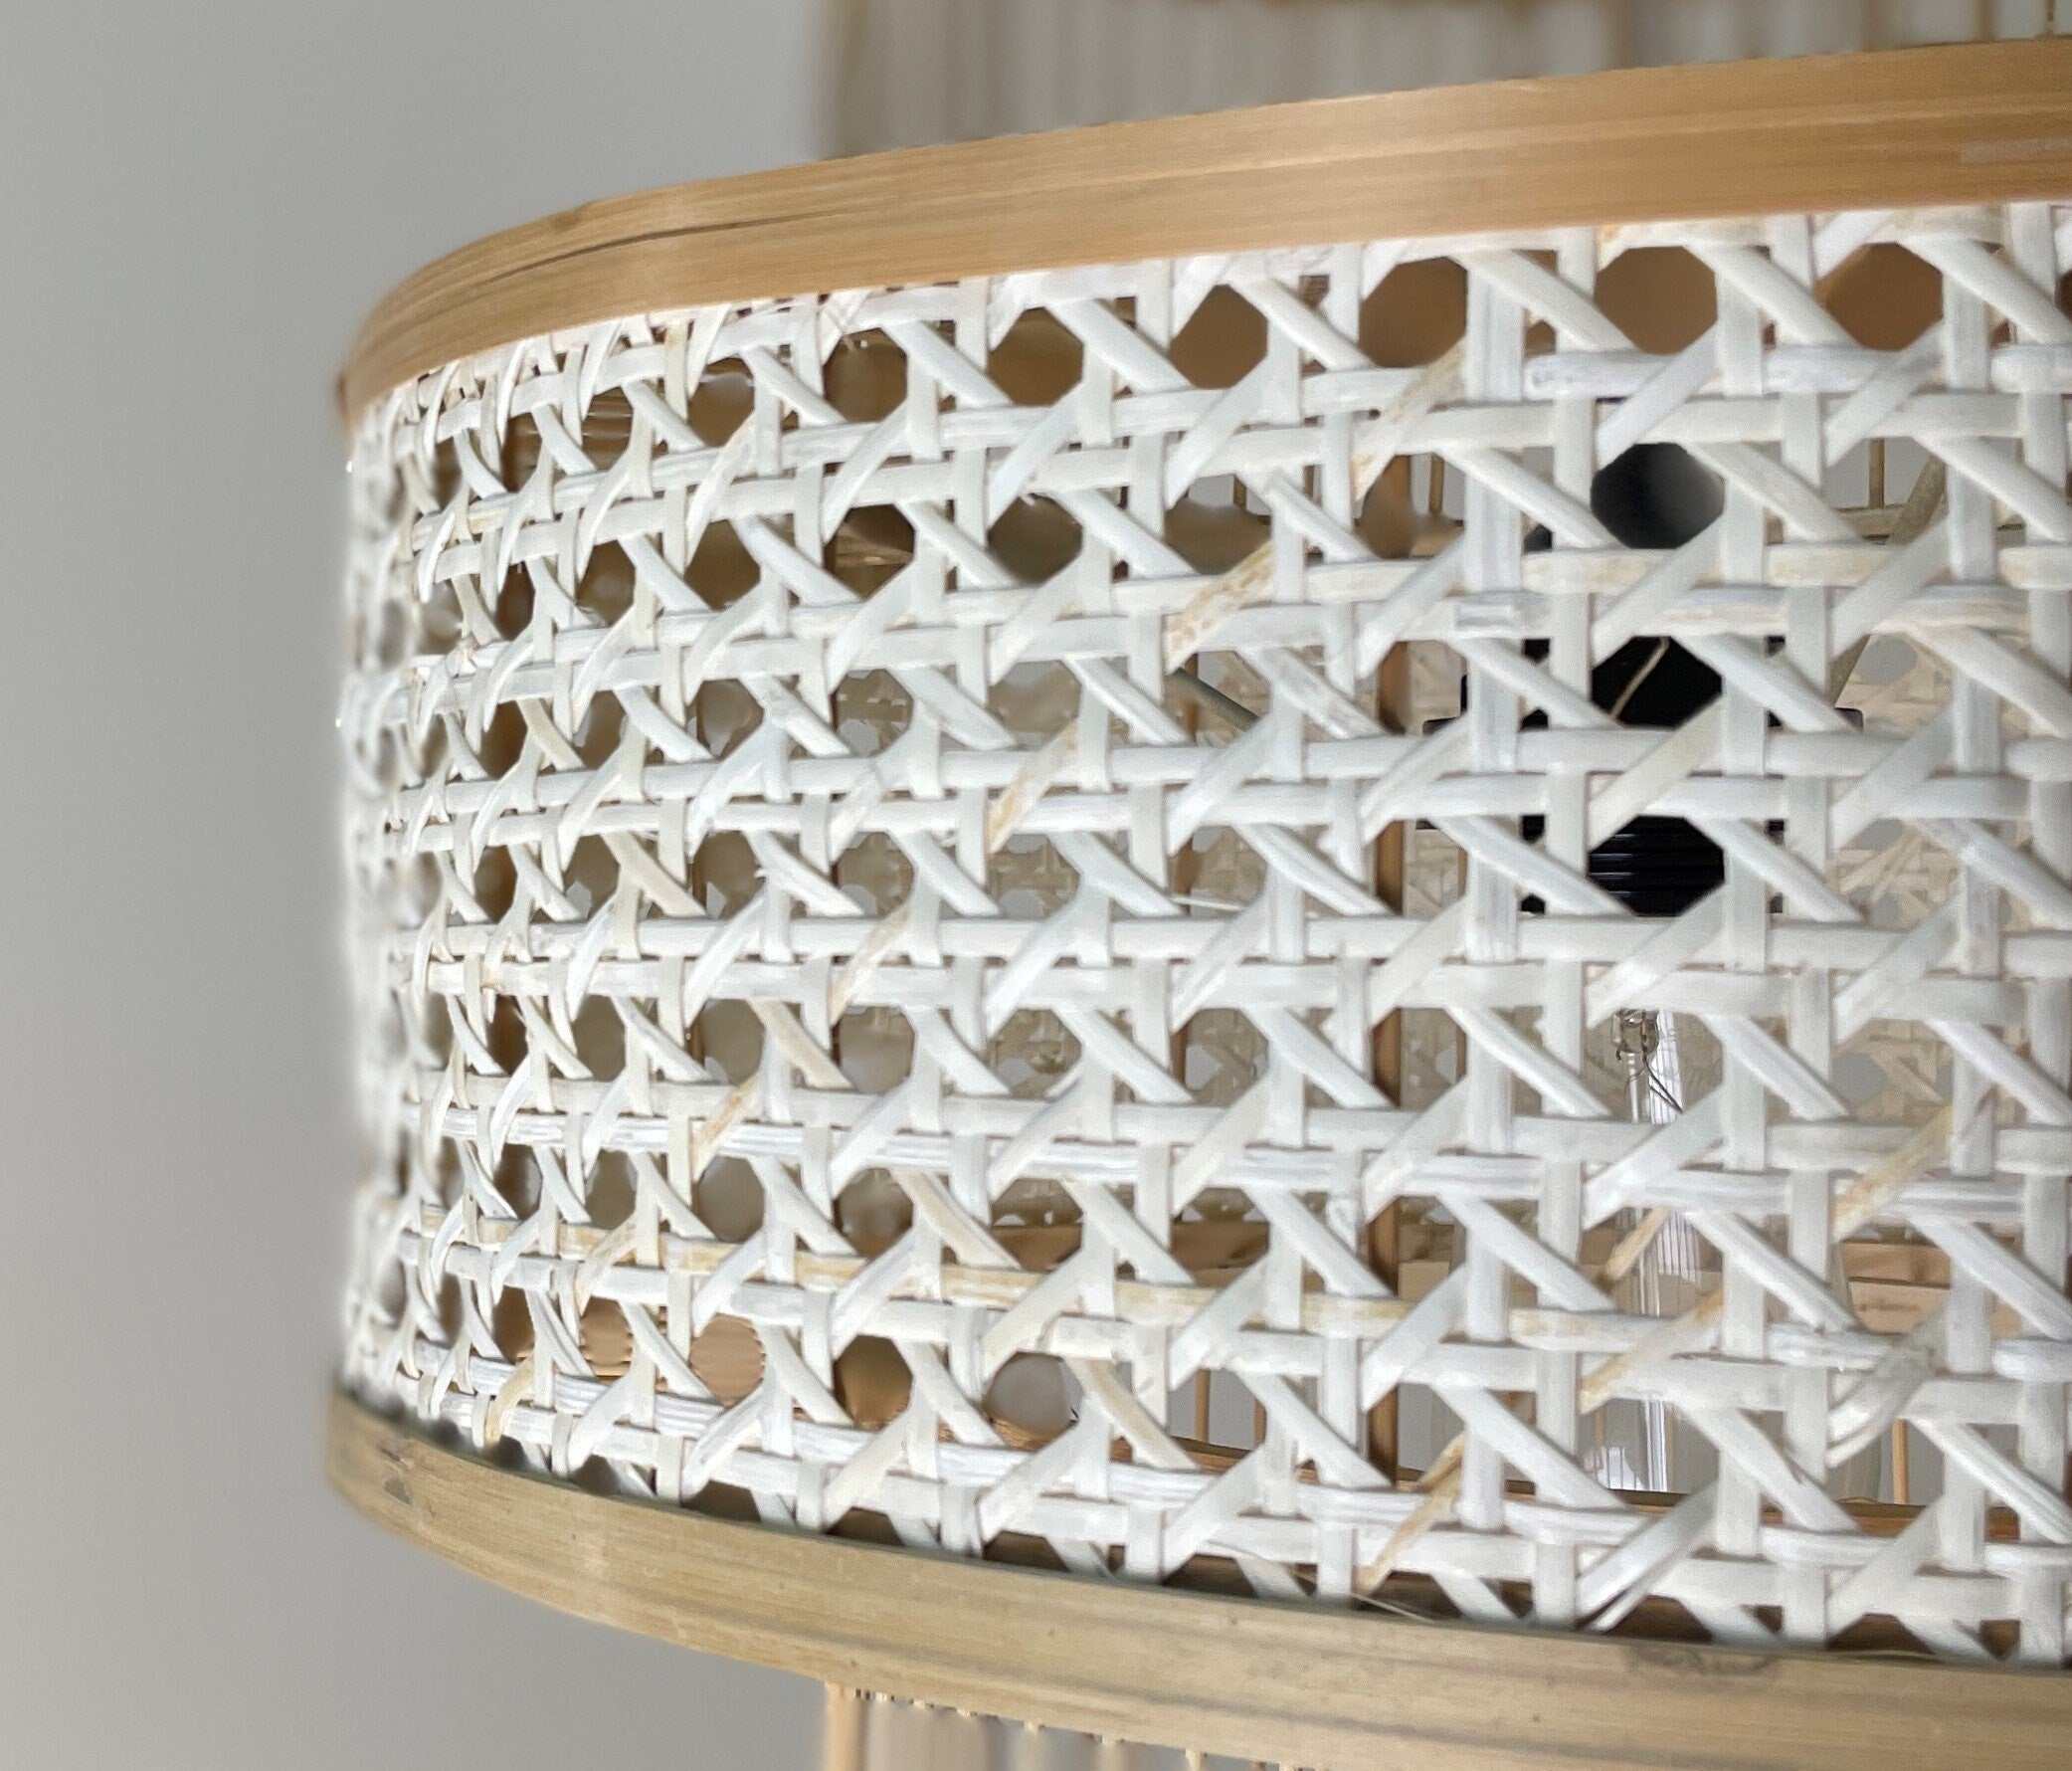 Wicker Style Bamboo Lampshade Handcrafted by Vietnamese Artisans, Sustainable Eco Friendly Lighting, Pendant Light, Chandelier, Lampshade